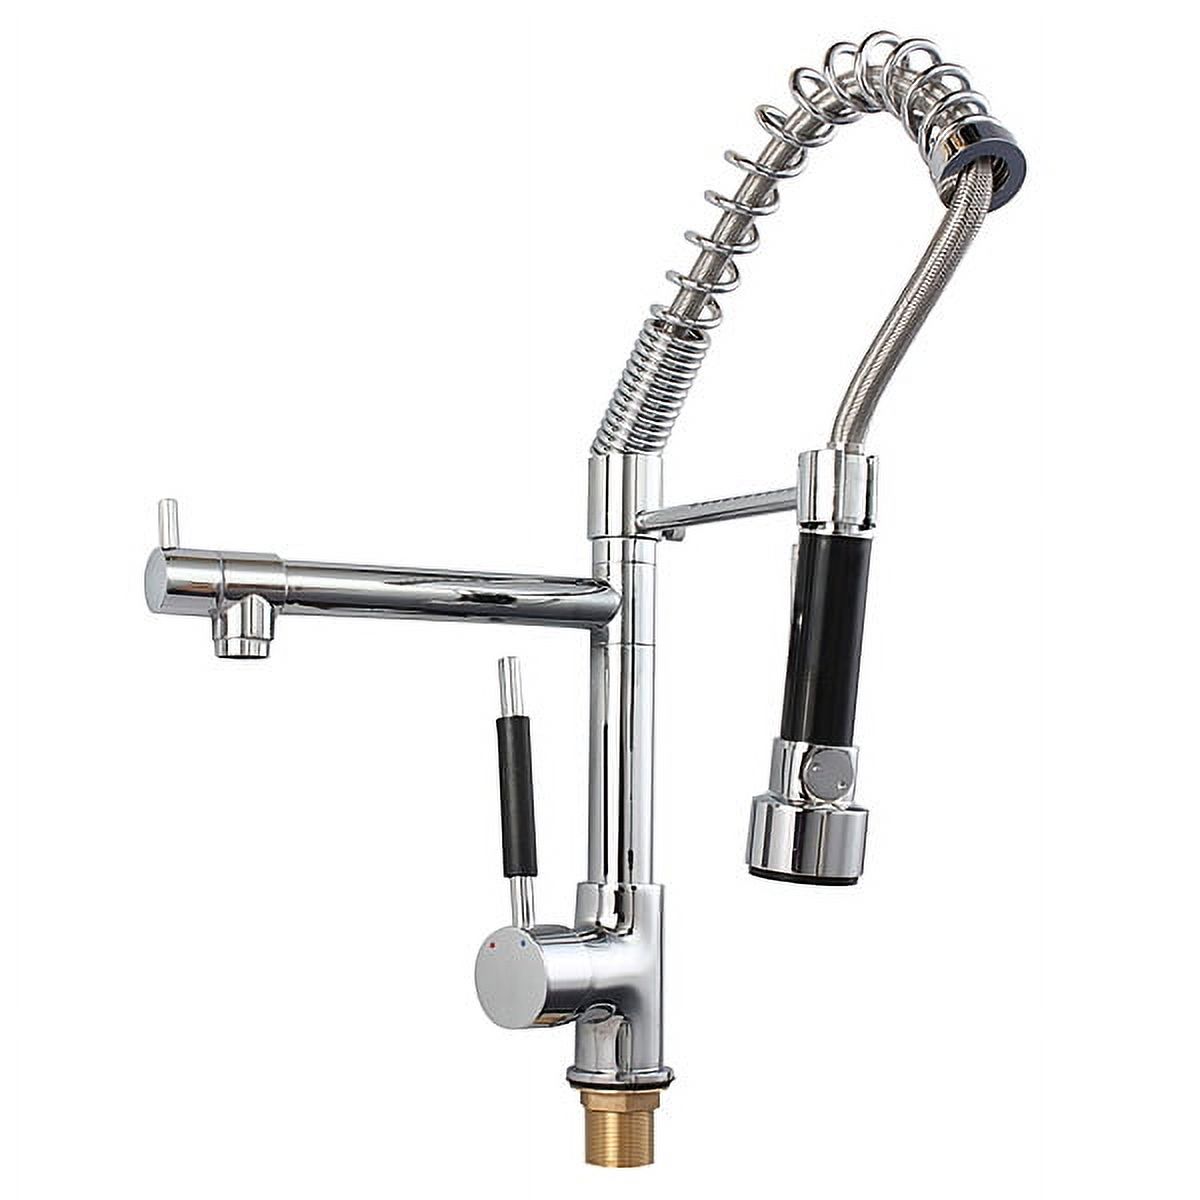 Kadell G1/2'' Silver Kitchen Faucet Single Handle Pull Down Sprayer Sink Mixer Tap Kitchen Sink Faucet Pull out Spray Rotating Tap - image 1 of 8